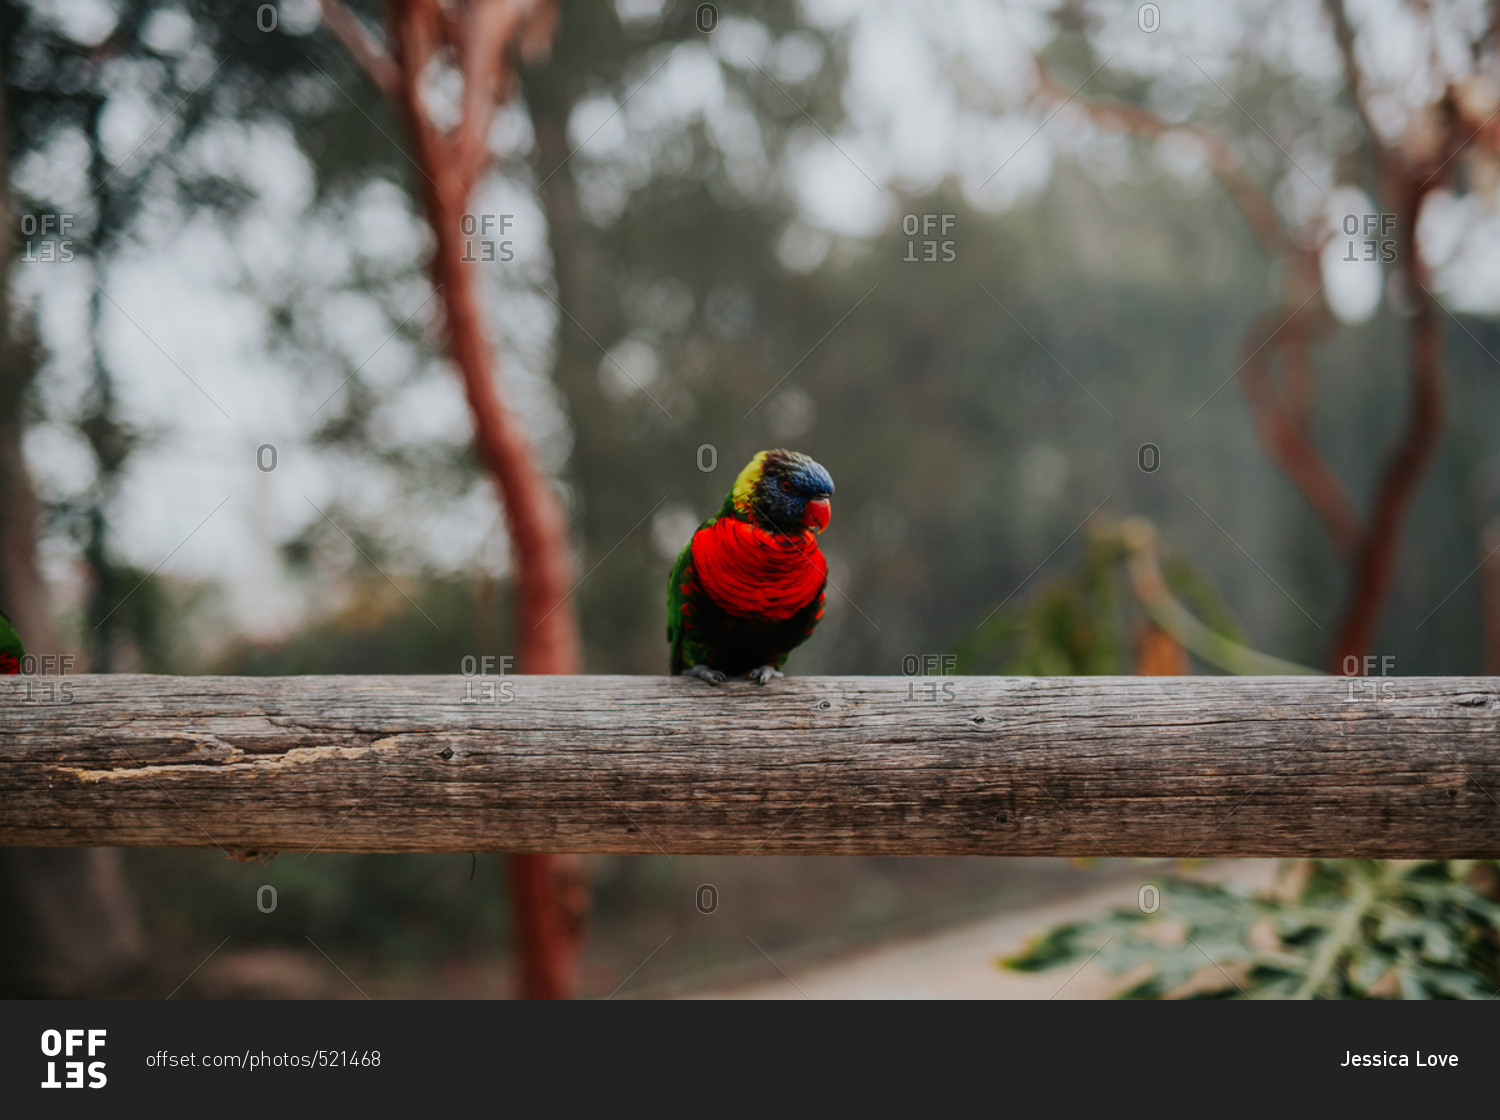 A colorful bird on perch